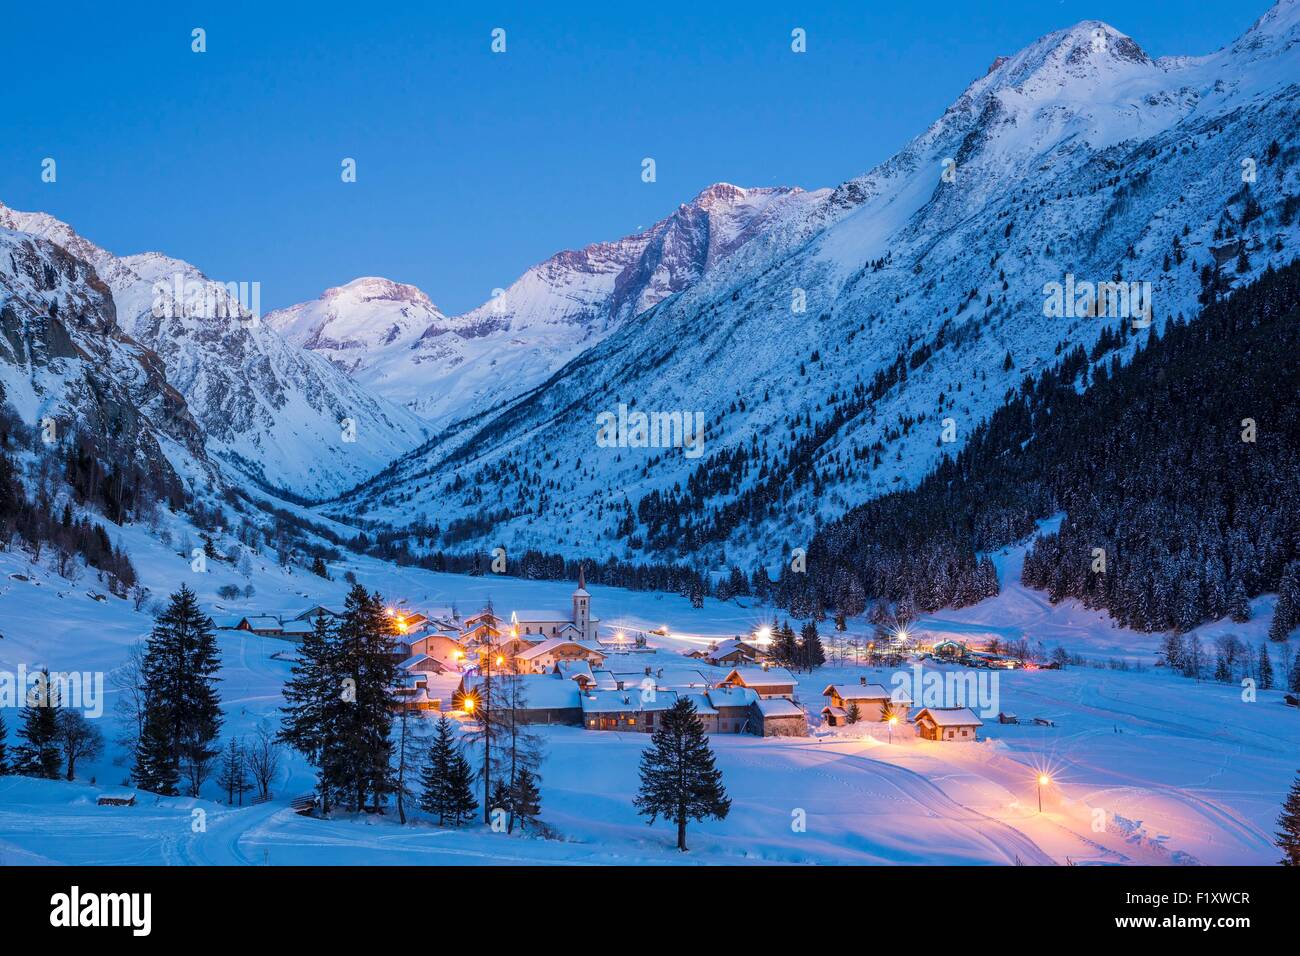 France, Savoie, Champagny en Vanoise, Champagny le Haut, massif of La Vanoise, the hamlet of Bois Dessous with views of the Grande Casse (3855m) and the Grande Motte (3653m) Stock Photo